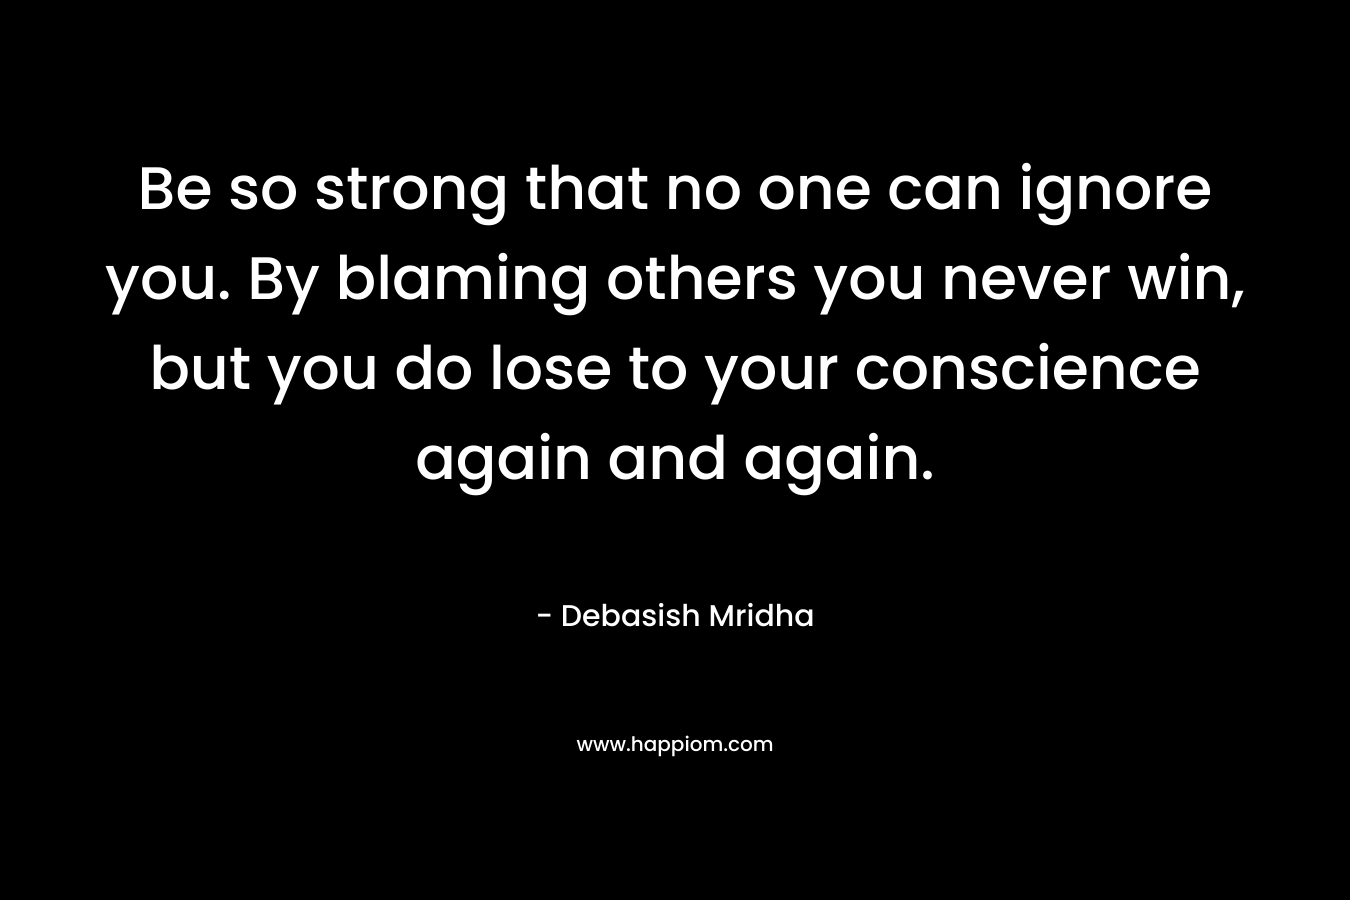 Be so strong that no one can ignore you. By blaming others you never win, but you do lose to your conscience again and again. – Debasish Mridha